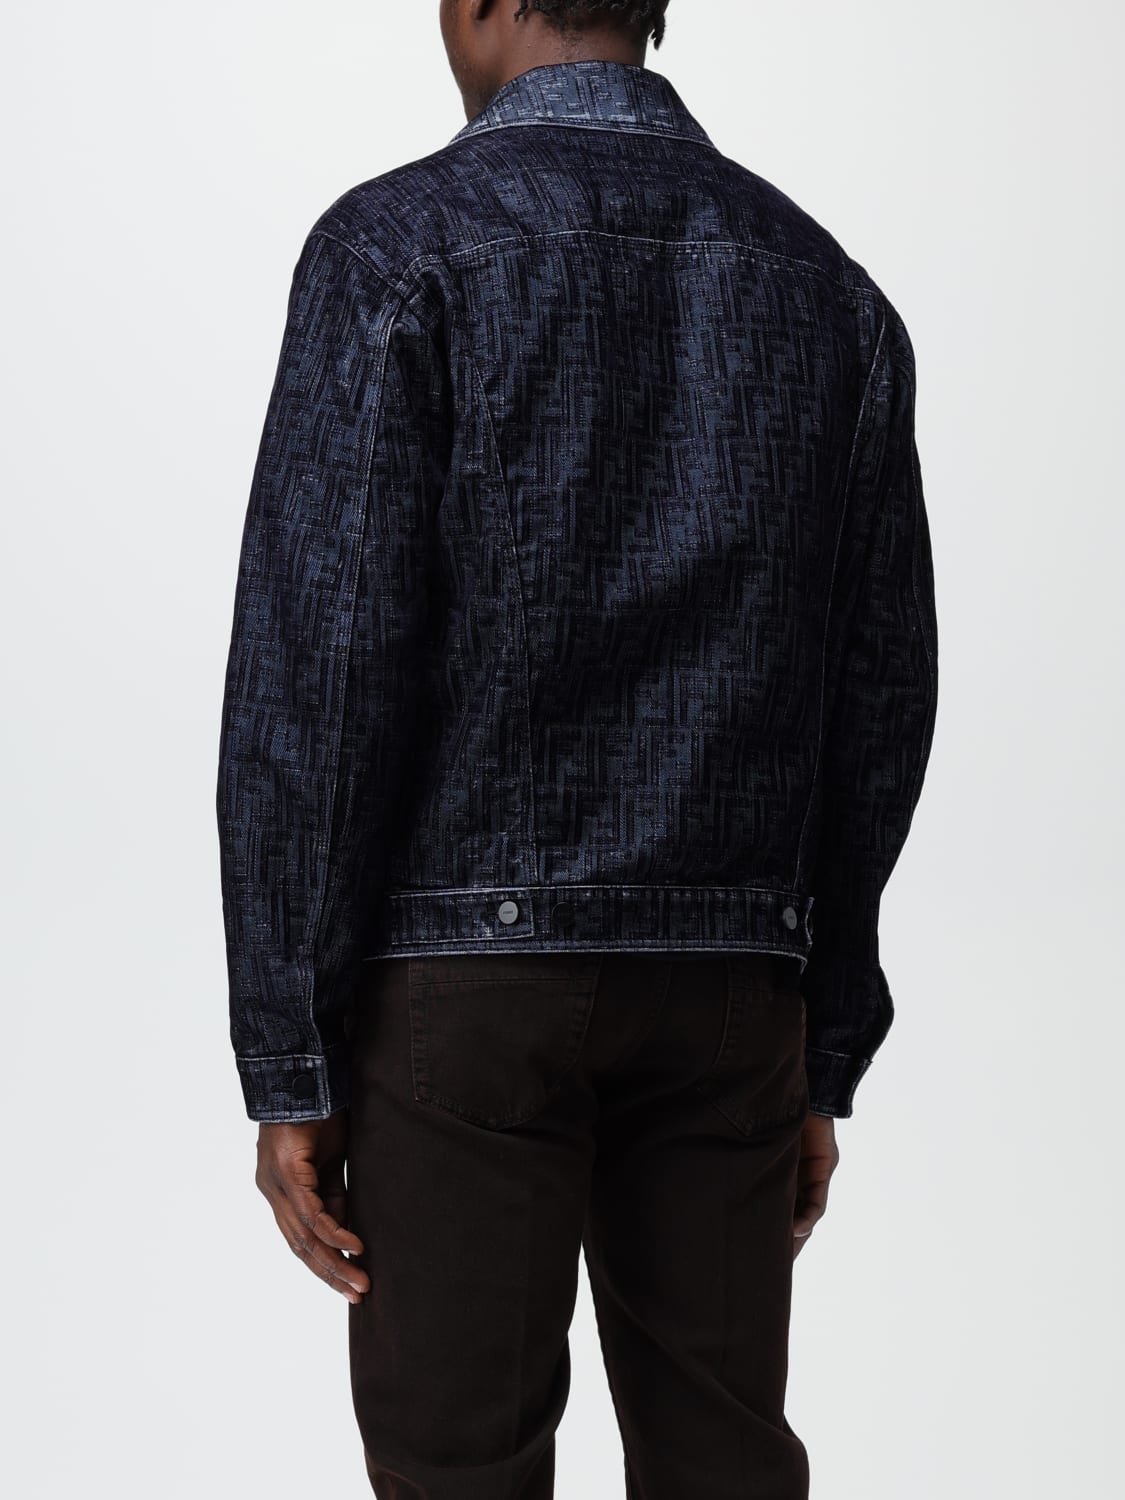 Fendi denim jacket with all-over FF pattern